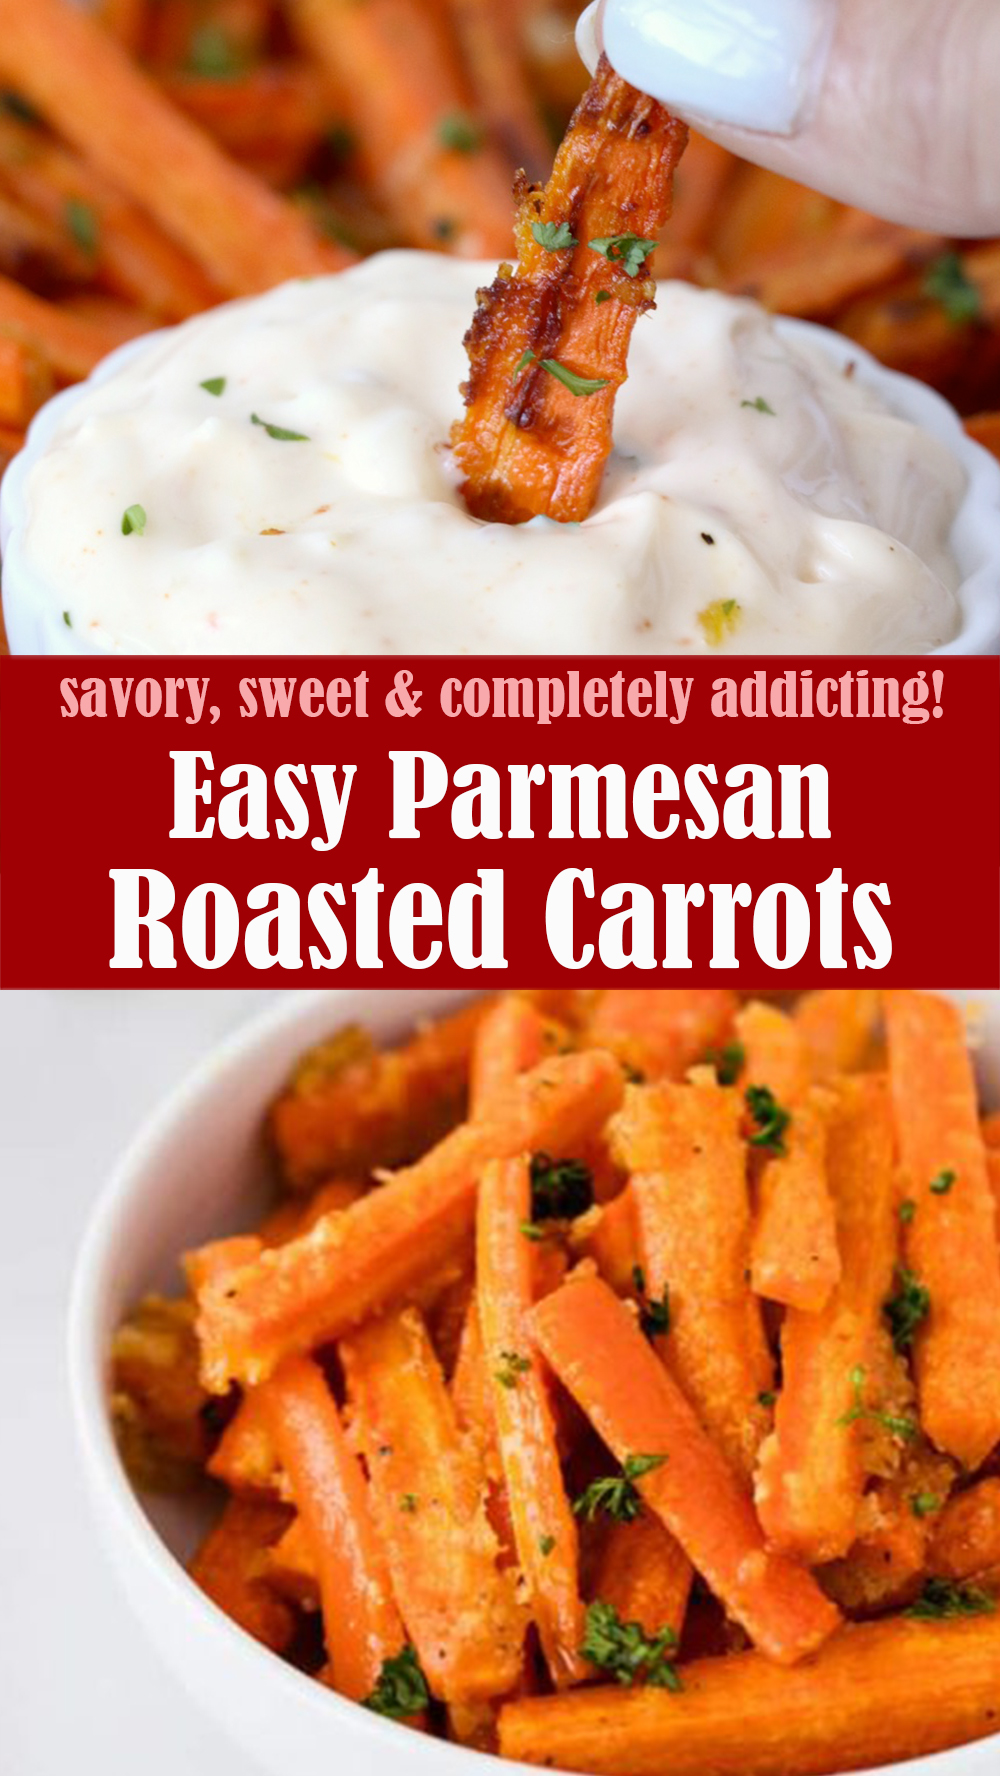 Easy Parmesan Roasted Carrots